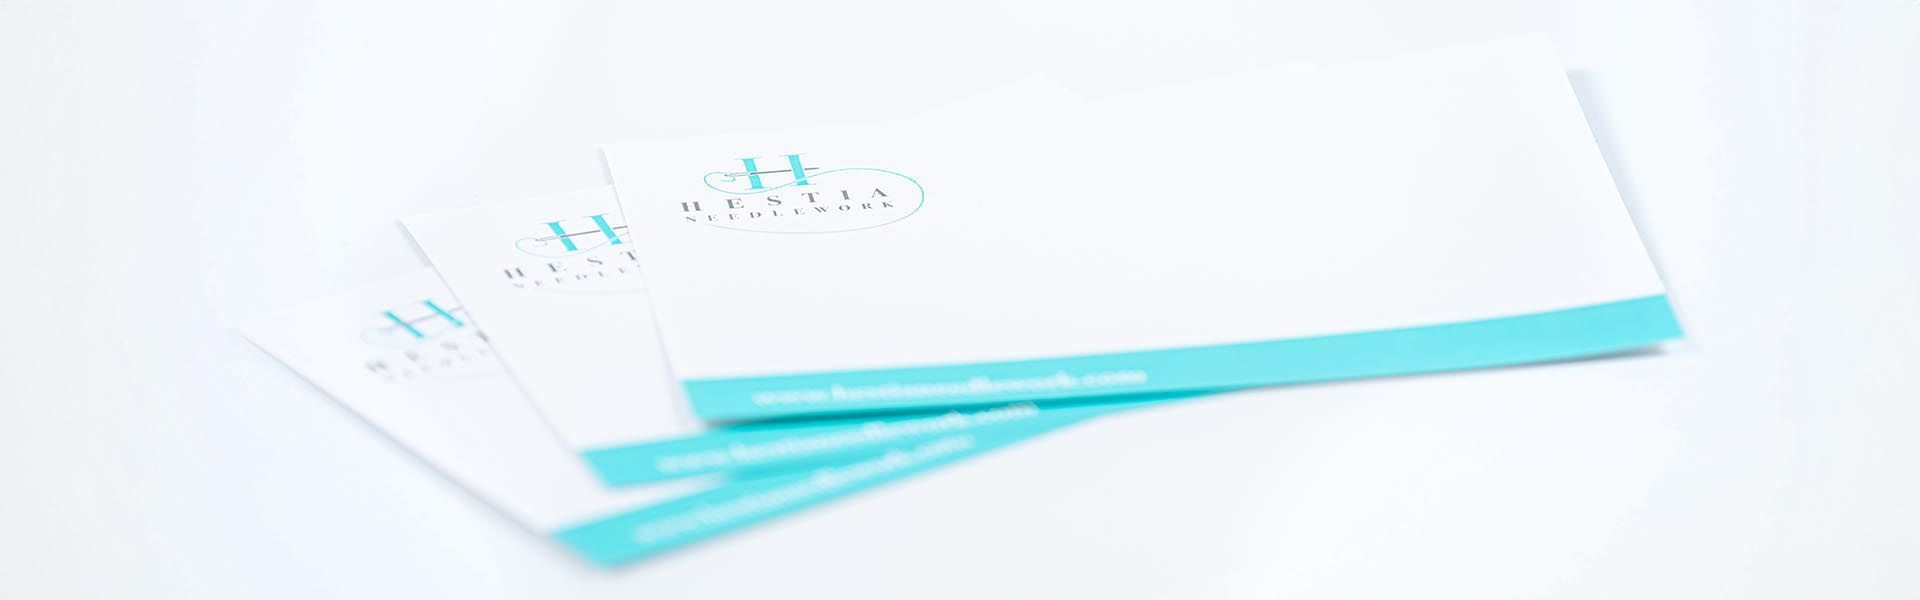 three business cards for hestia needlework are stacked on top of each other 